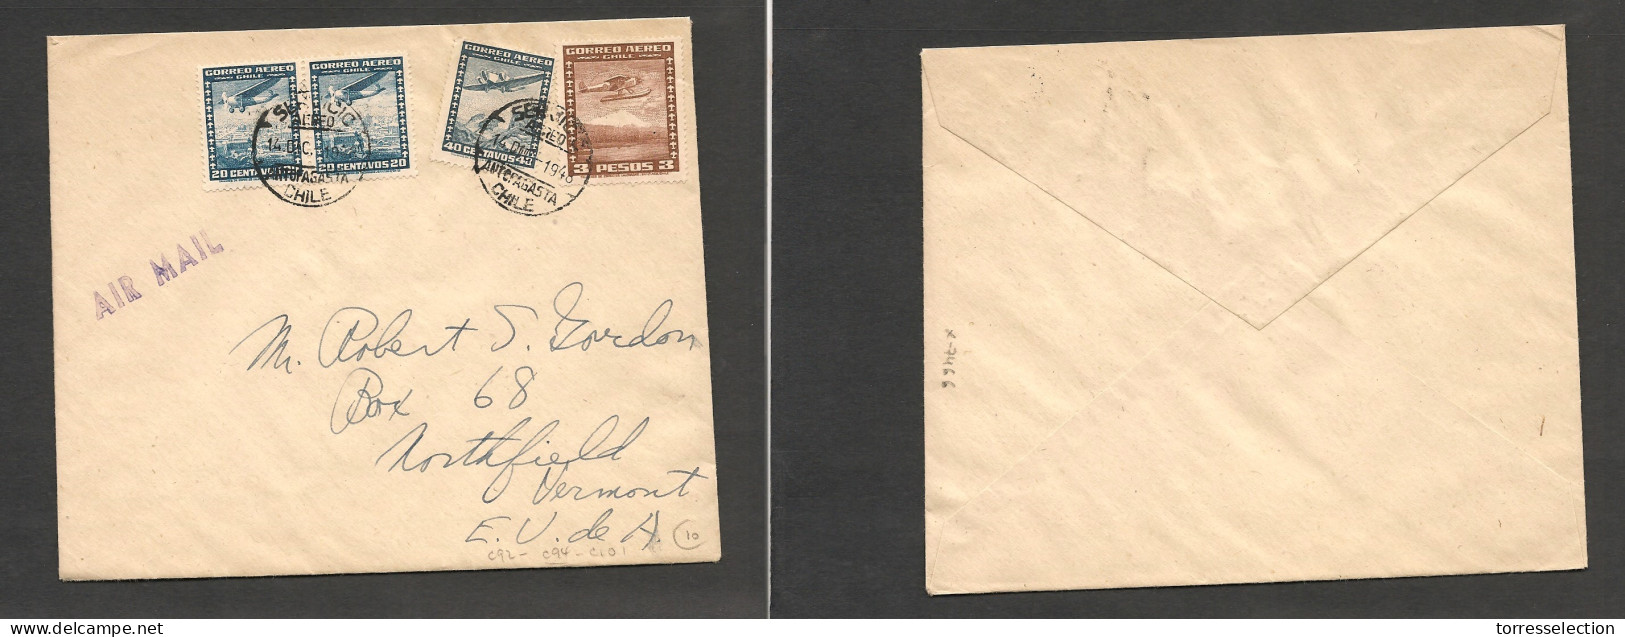 CHILE. Chile - Cover - 1948 Antofagasta To USA Northfield Vermont Air Mult Fkd Env At $4 Rate, Fine. Ex-Prof West UK Air - Cile